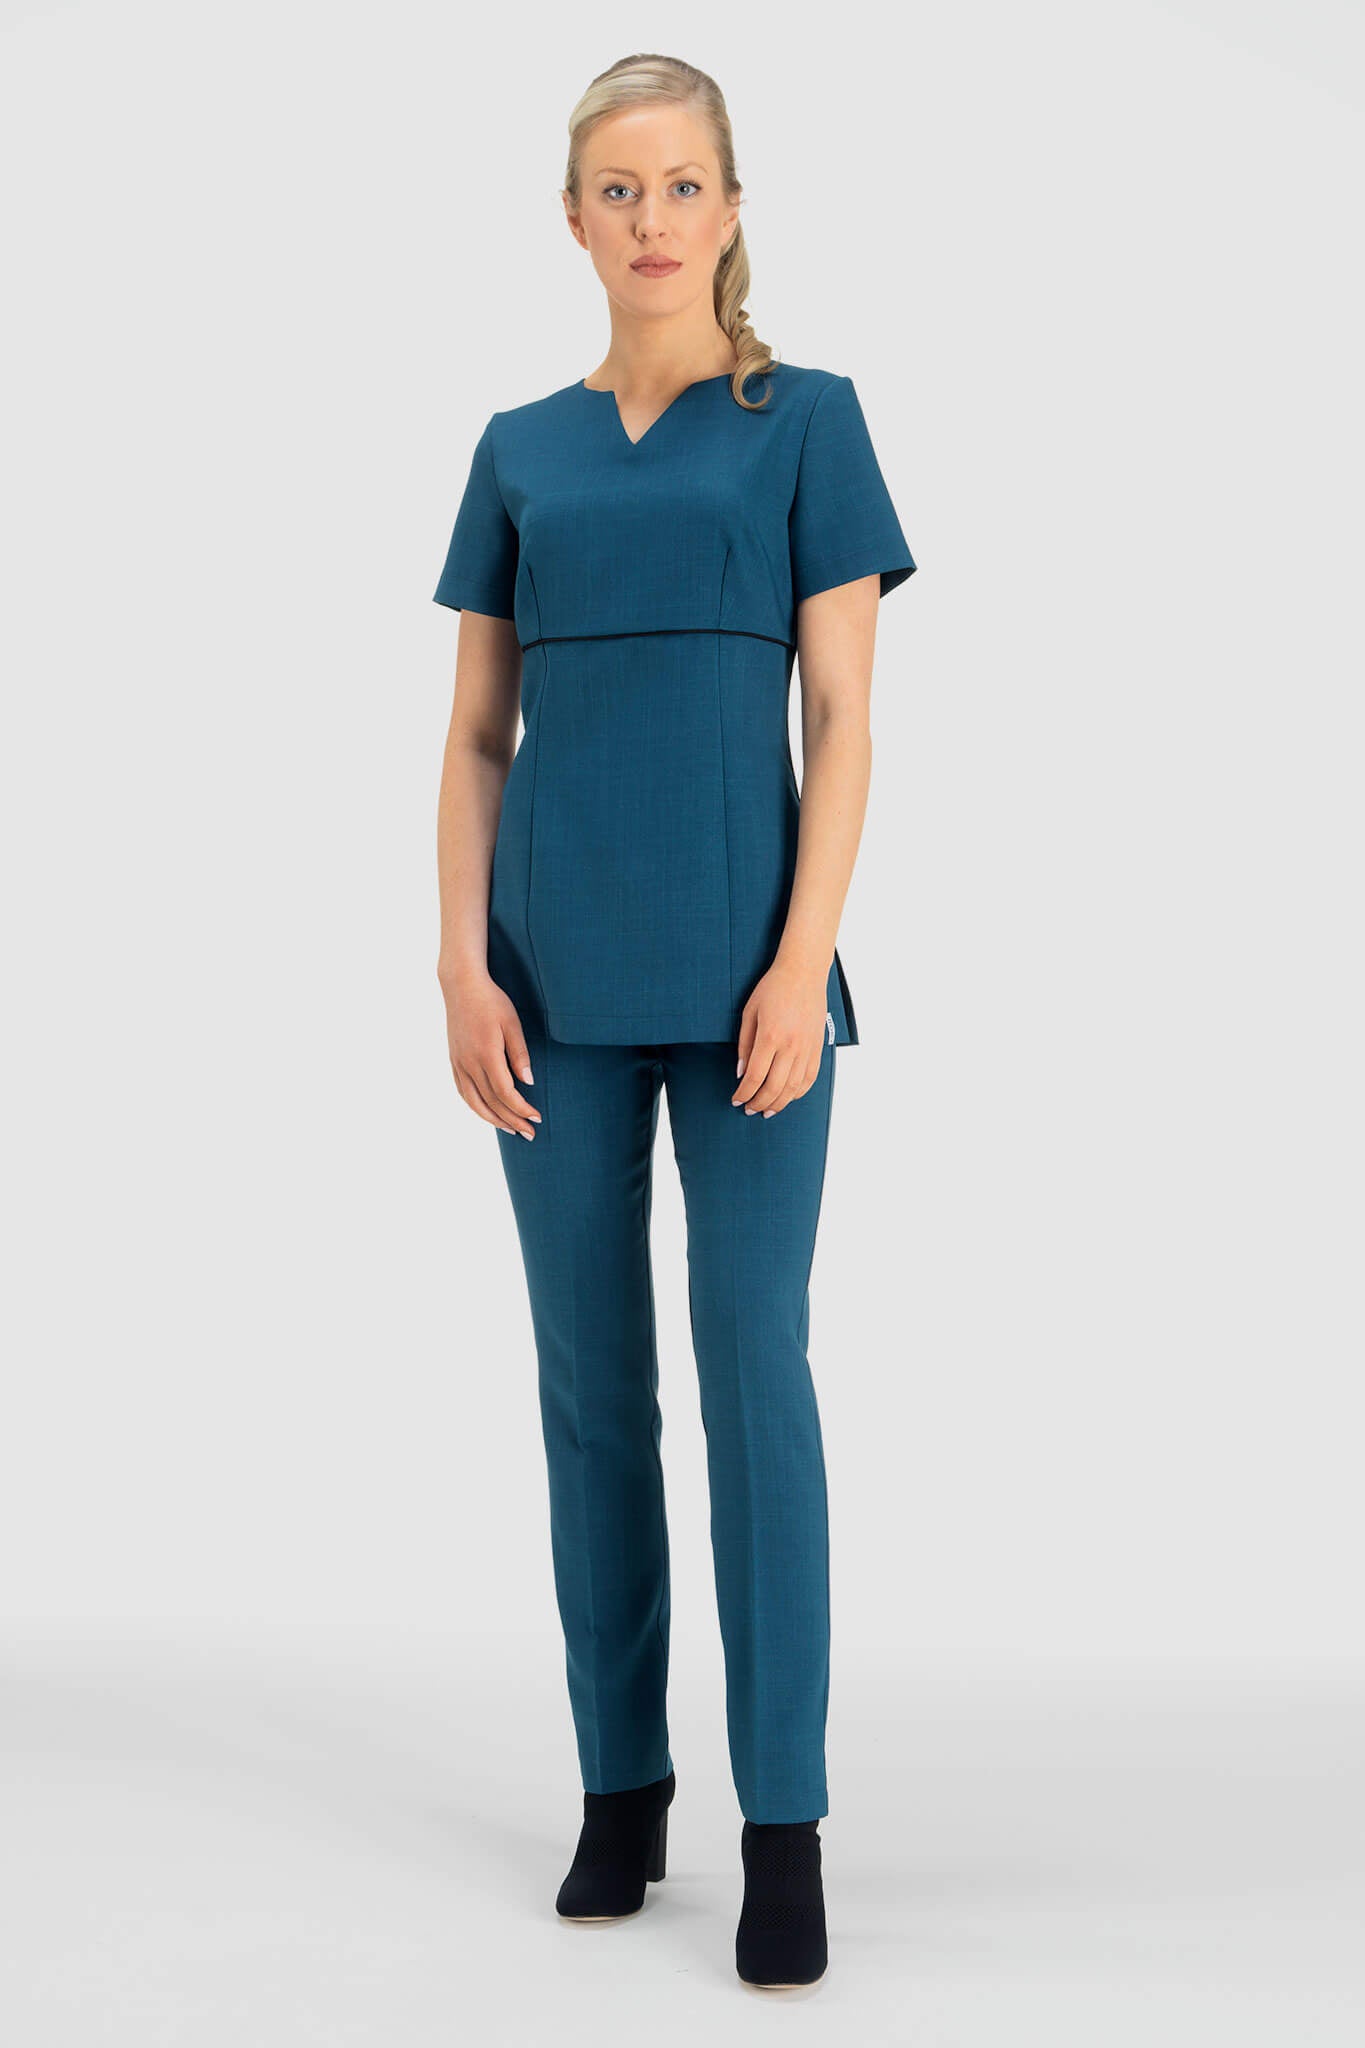 Lucca Tunic | Luxury Uniforms - Florence Roby